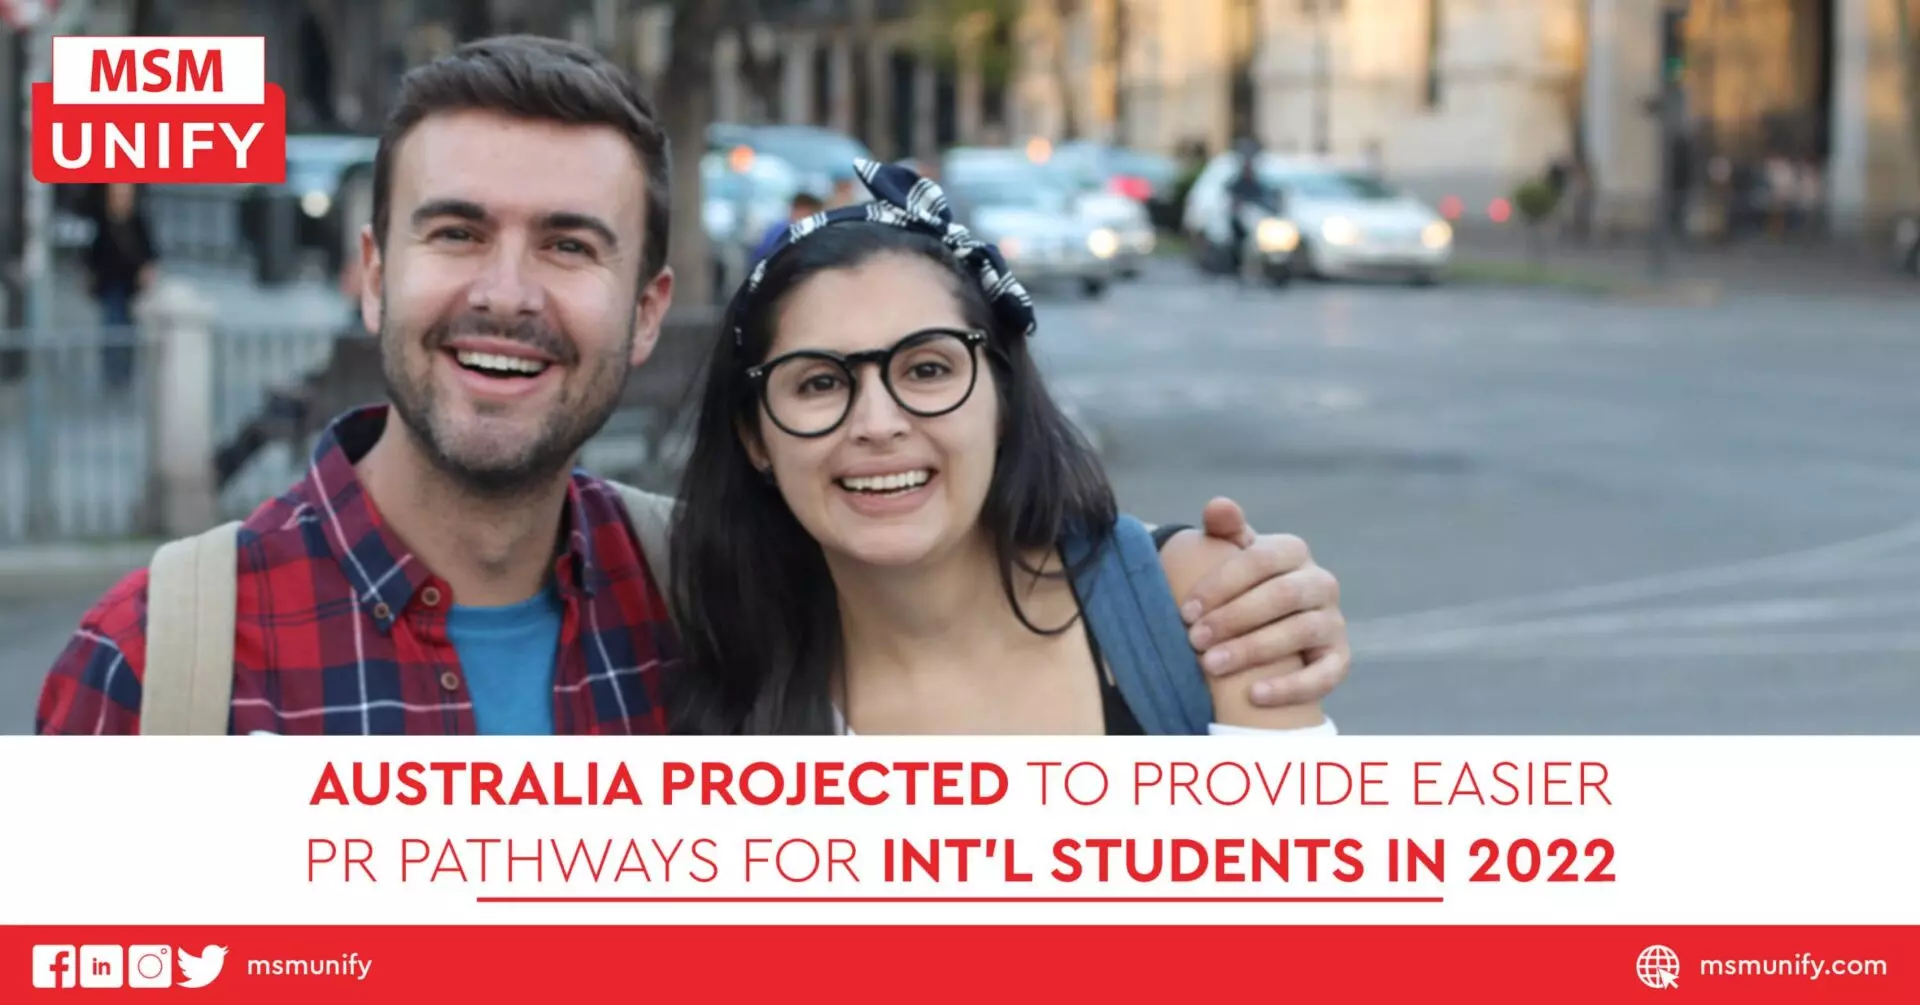 Australia Projected To Provide Easier PR Pathways for Intl Students In 2022 scaled 1